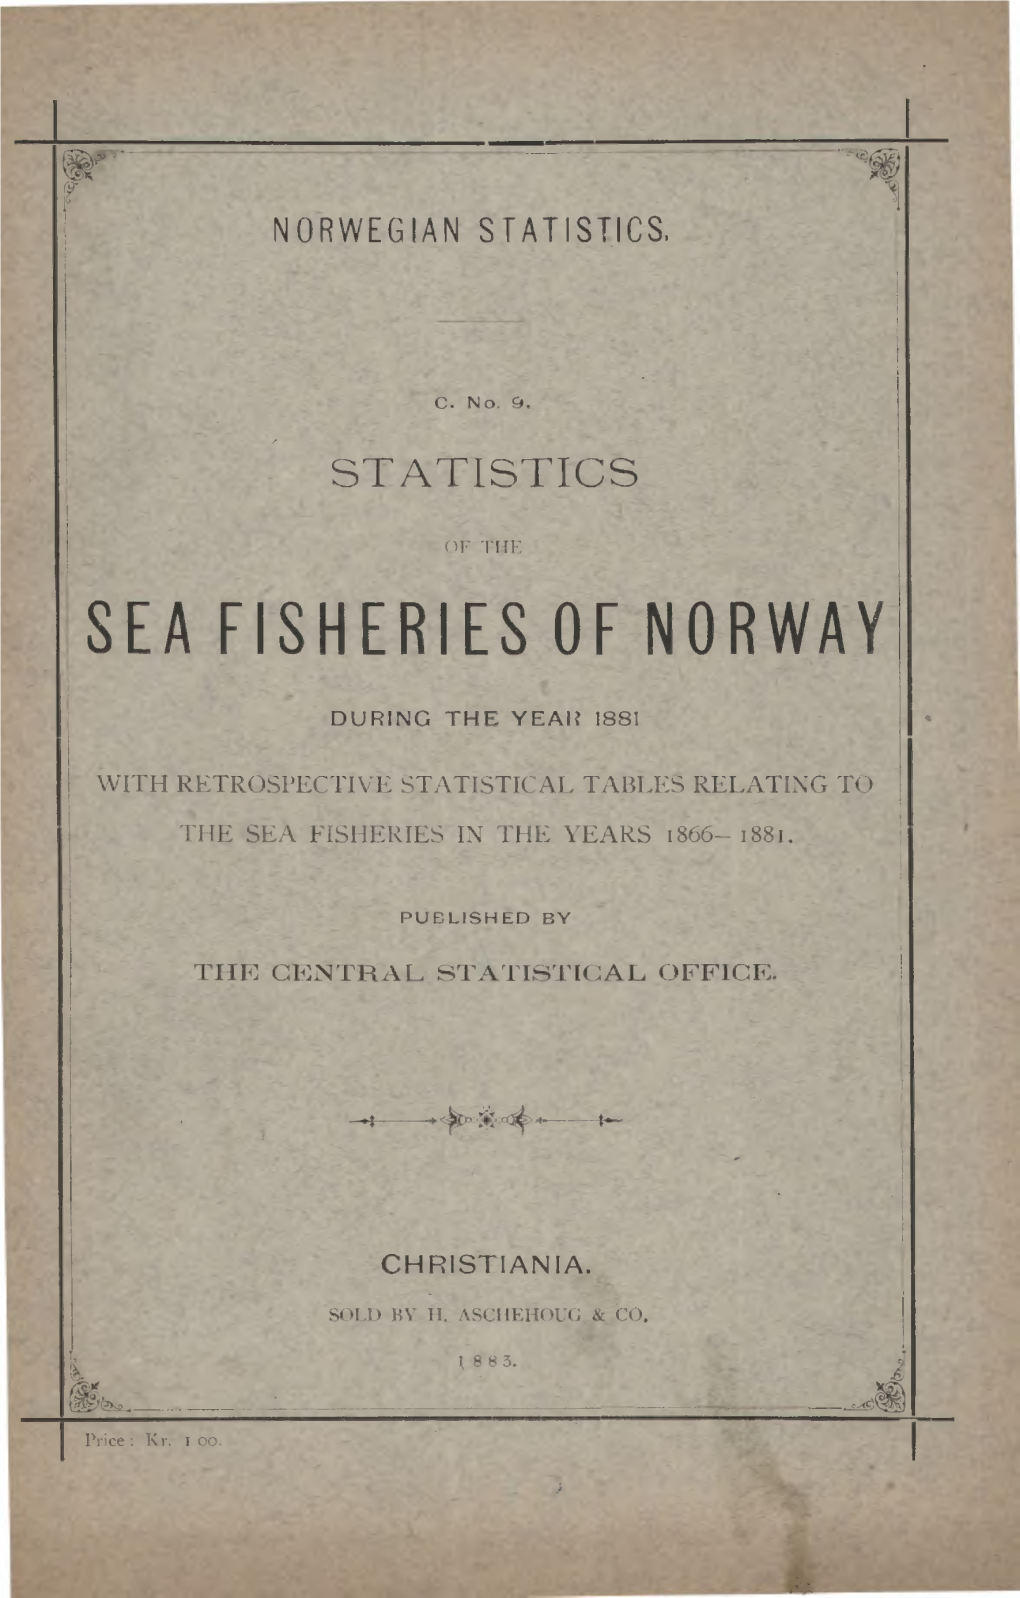 Statistics of the Sea Fisheries of Norway During the Year 1881 With